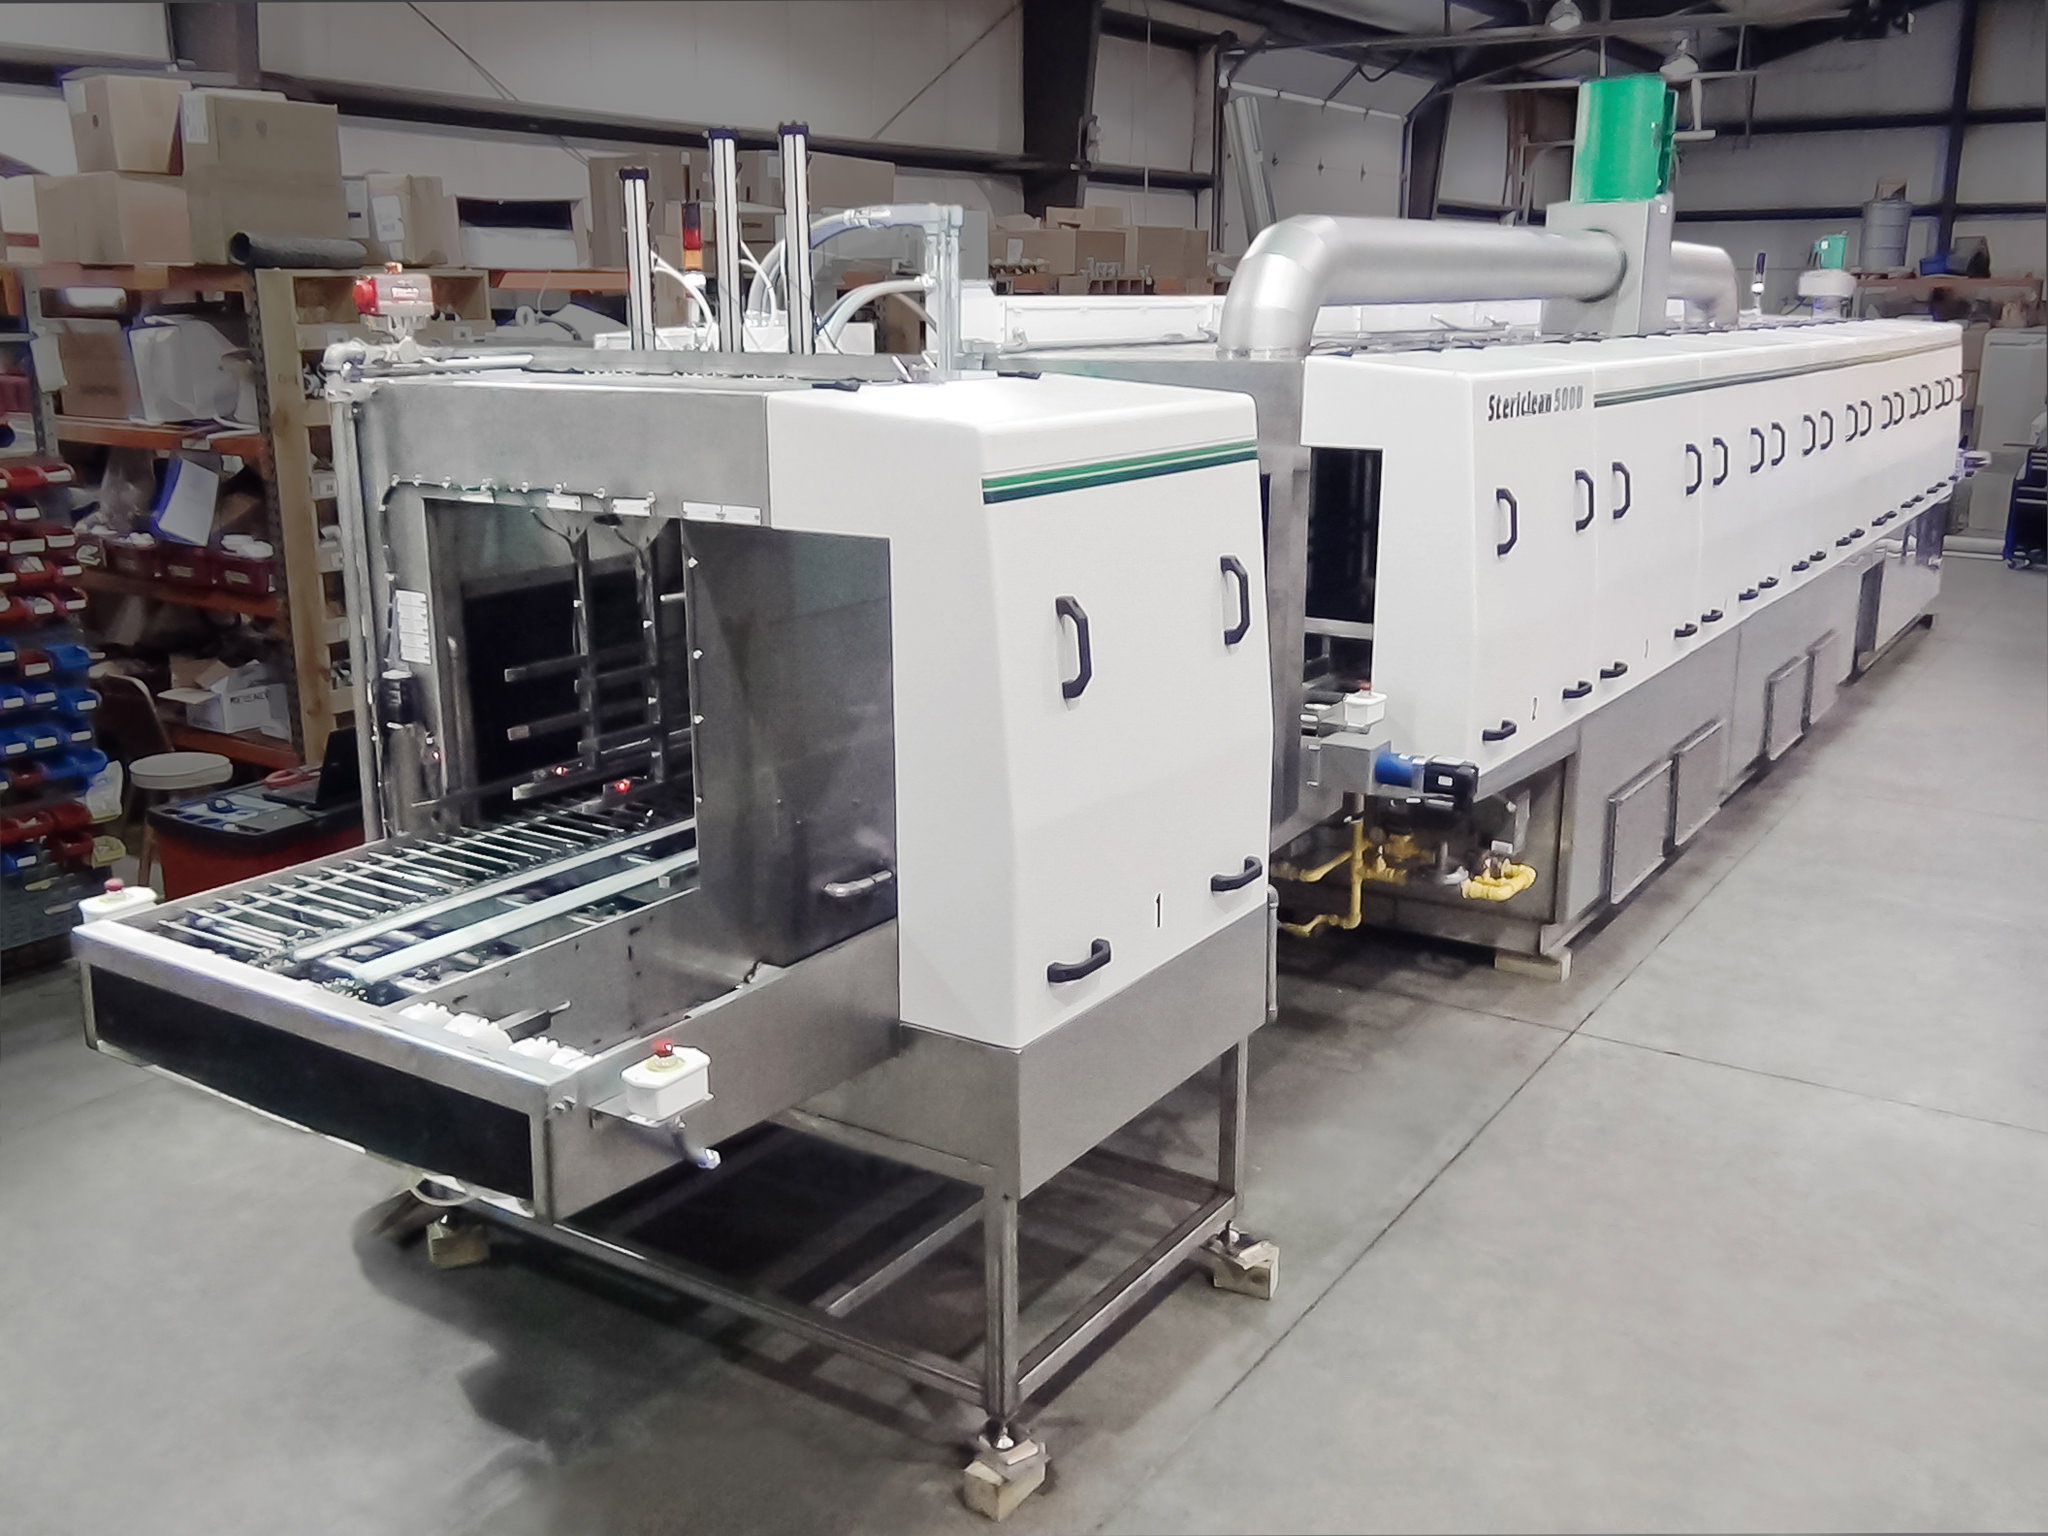 Multi-lane wash and dry for sterilizing medical waste containers